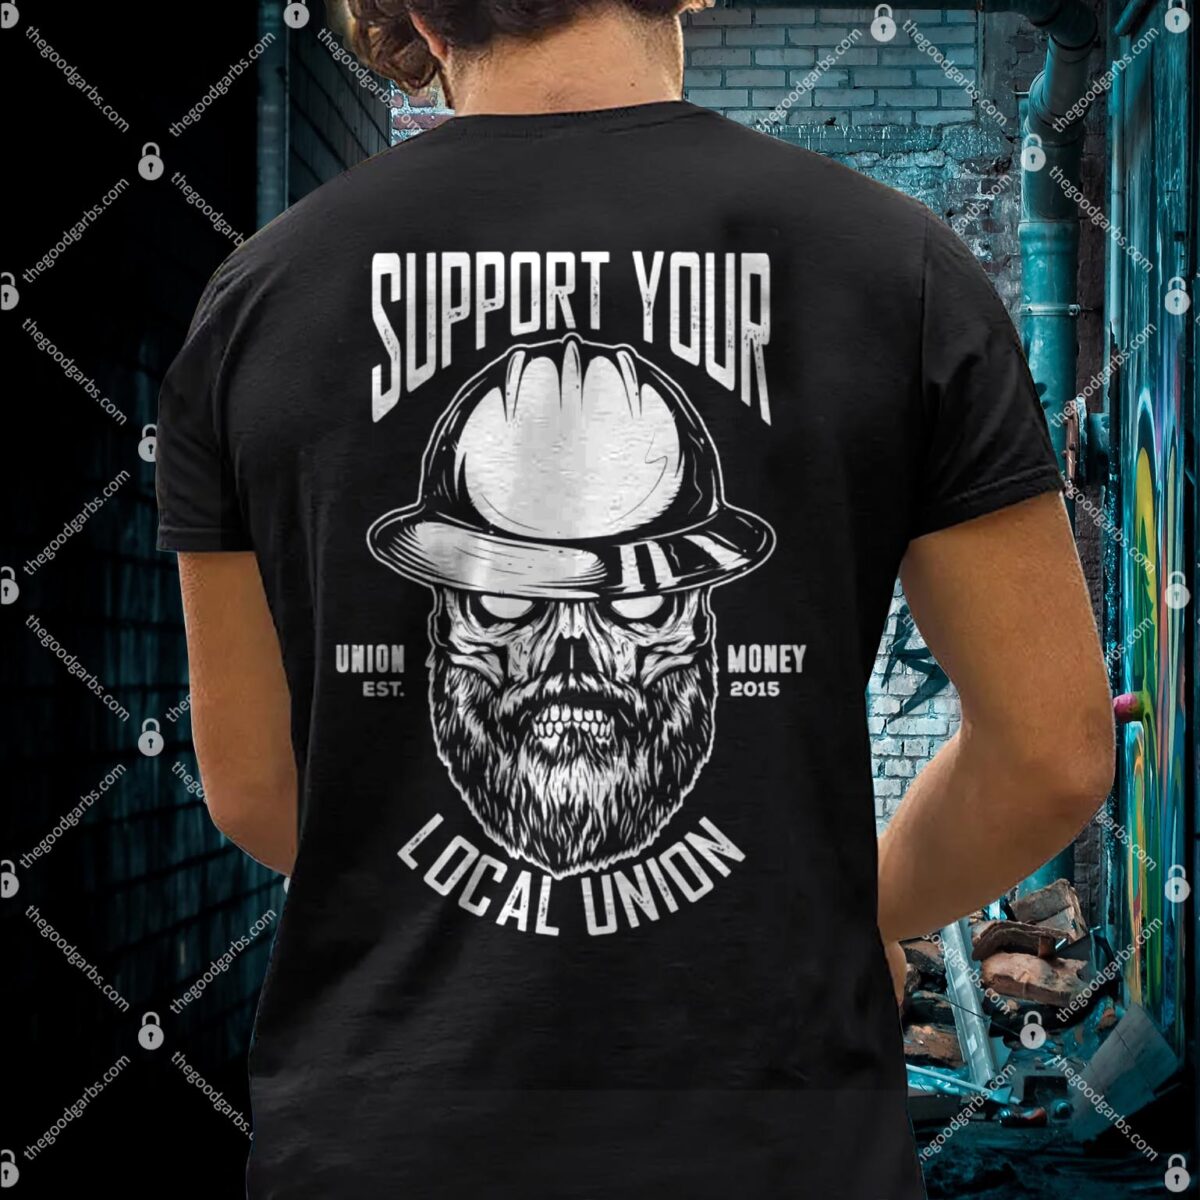 Support your Local Union T-Shirt